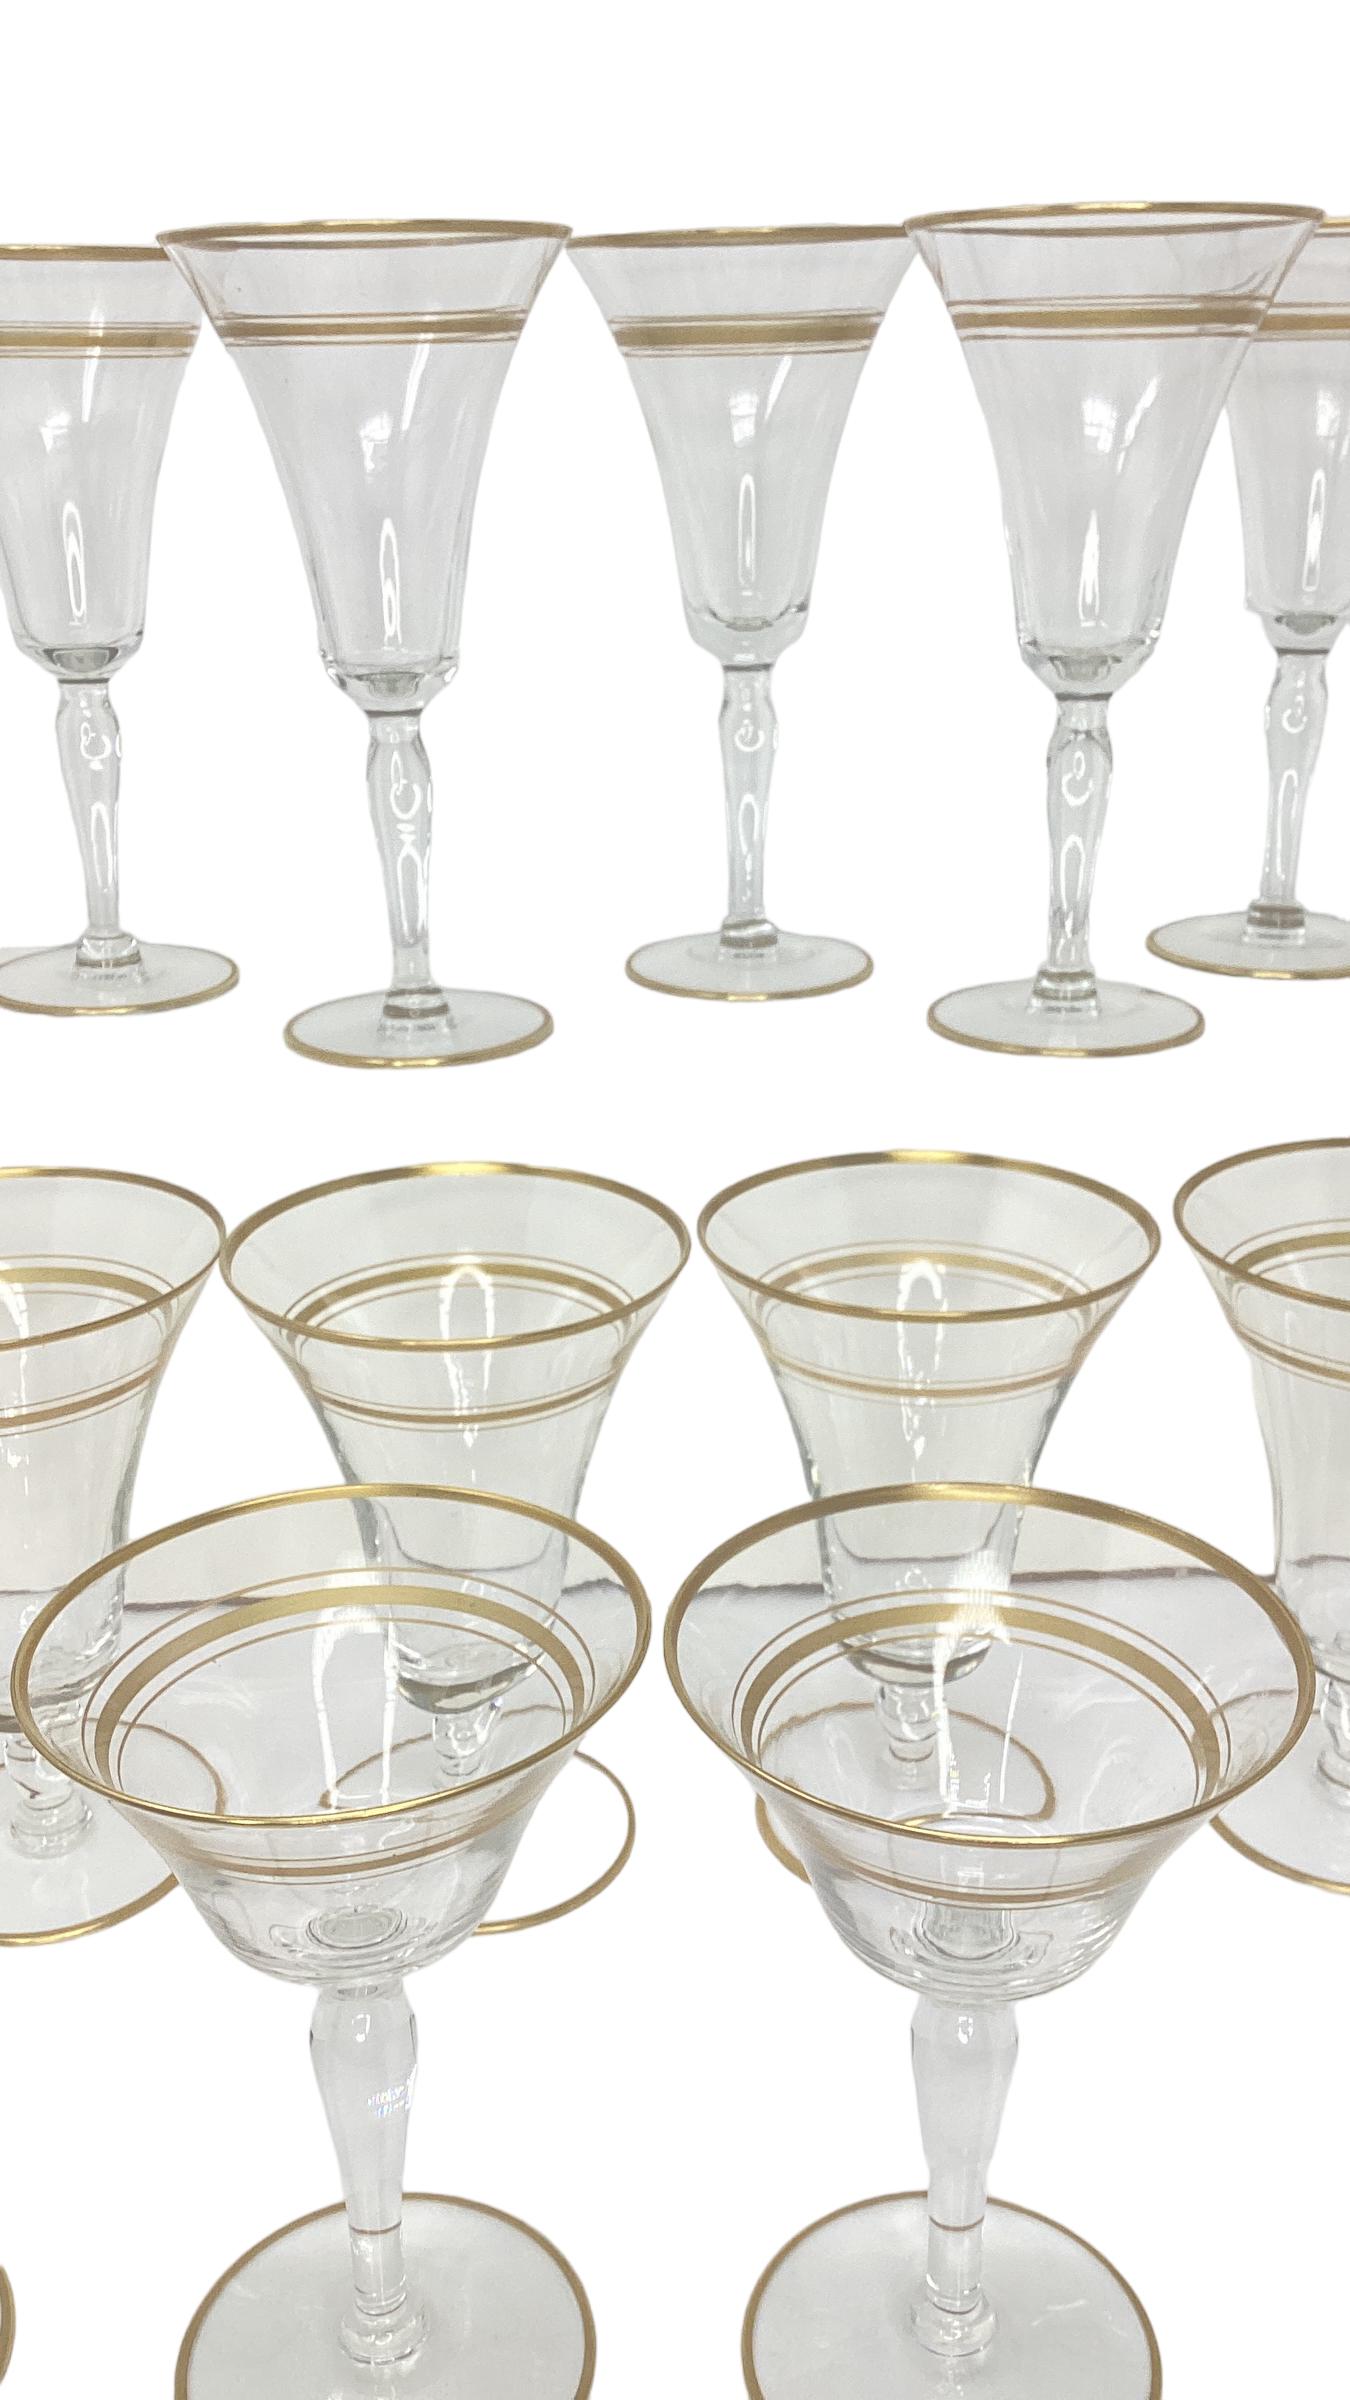 Set of 18 Vintage Gold Rimmed Glass Stemware. Set consists of 6 champagne coupes, 6 red wine glasses, 6 water goblets which can also be used for white wine. The coupe measures 3.75